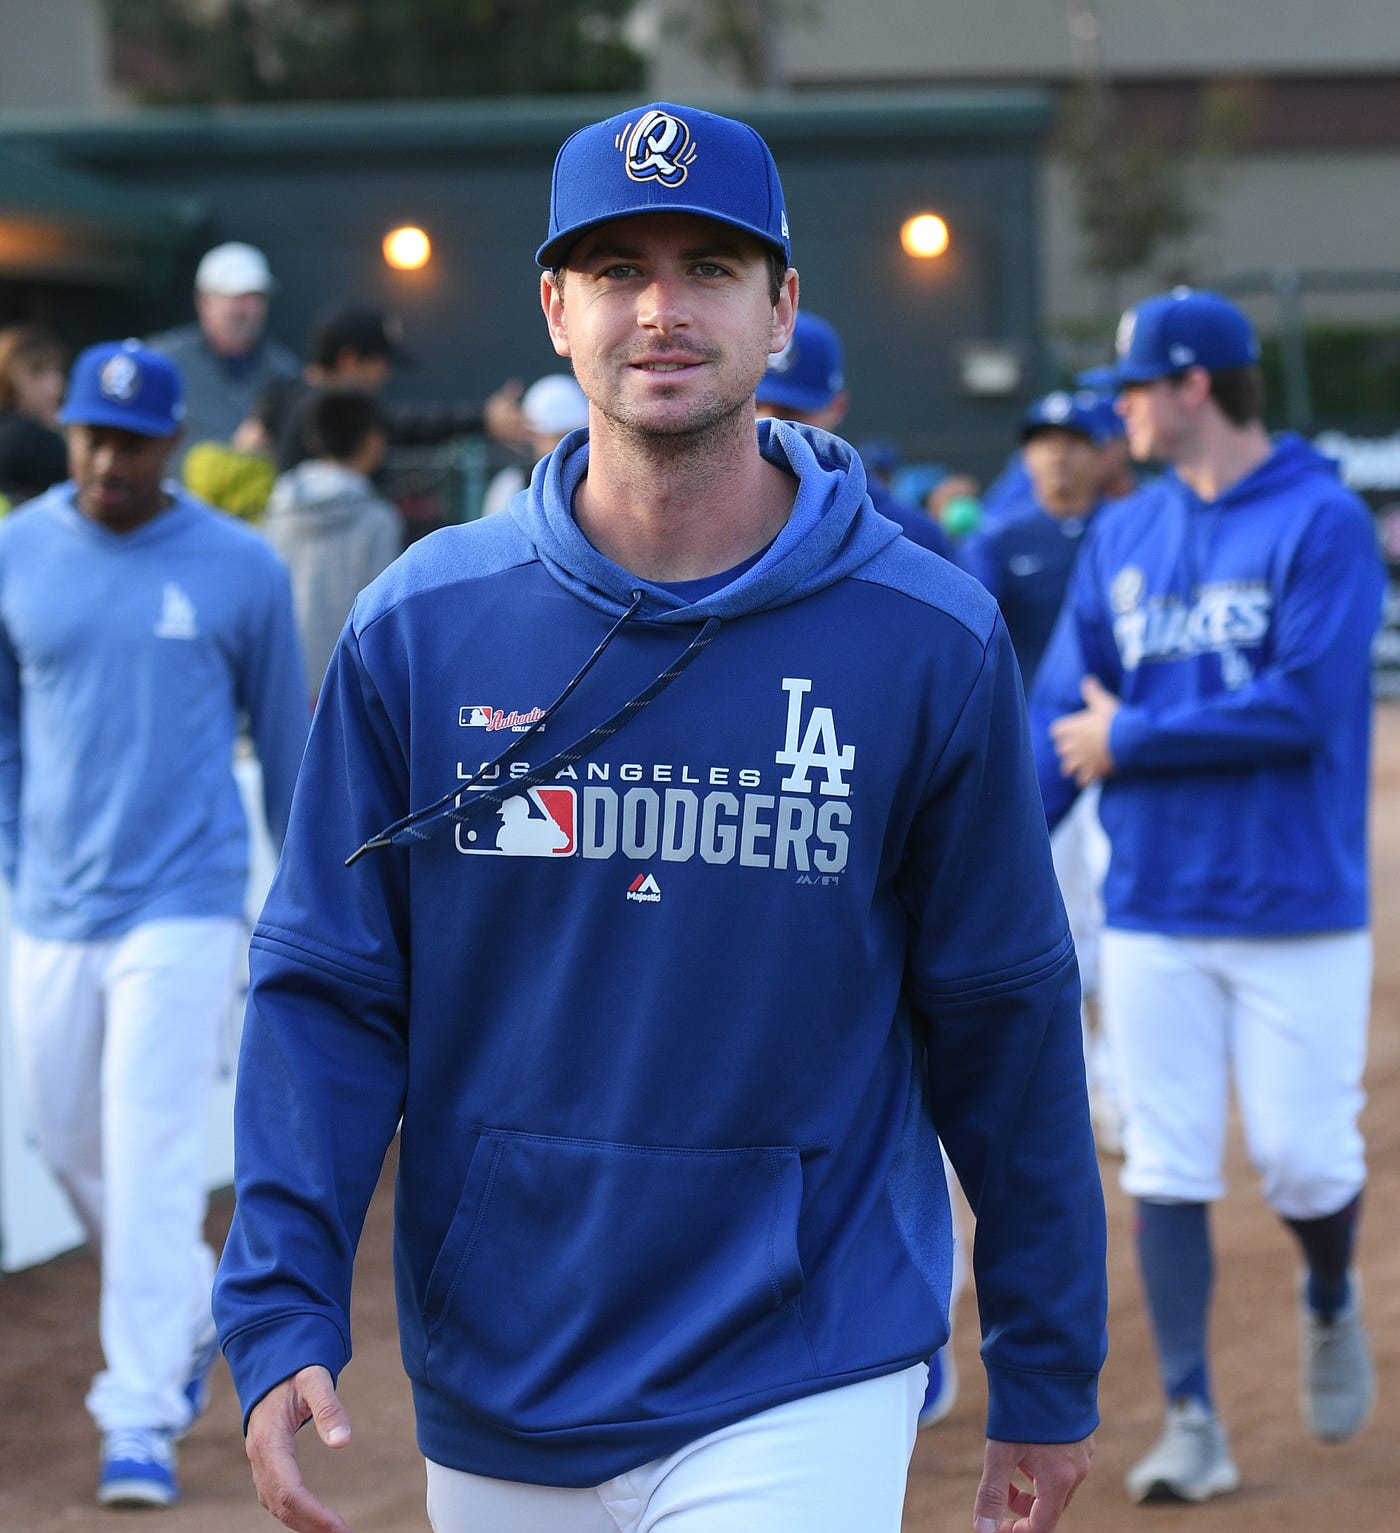 The pitching coach with the 'it factor' | by Cary Osborne | Dodger Insider